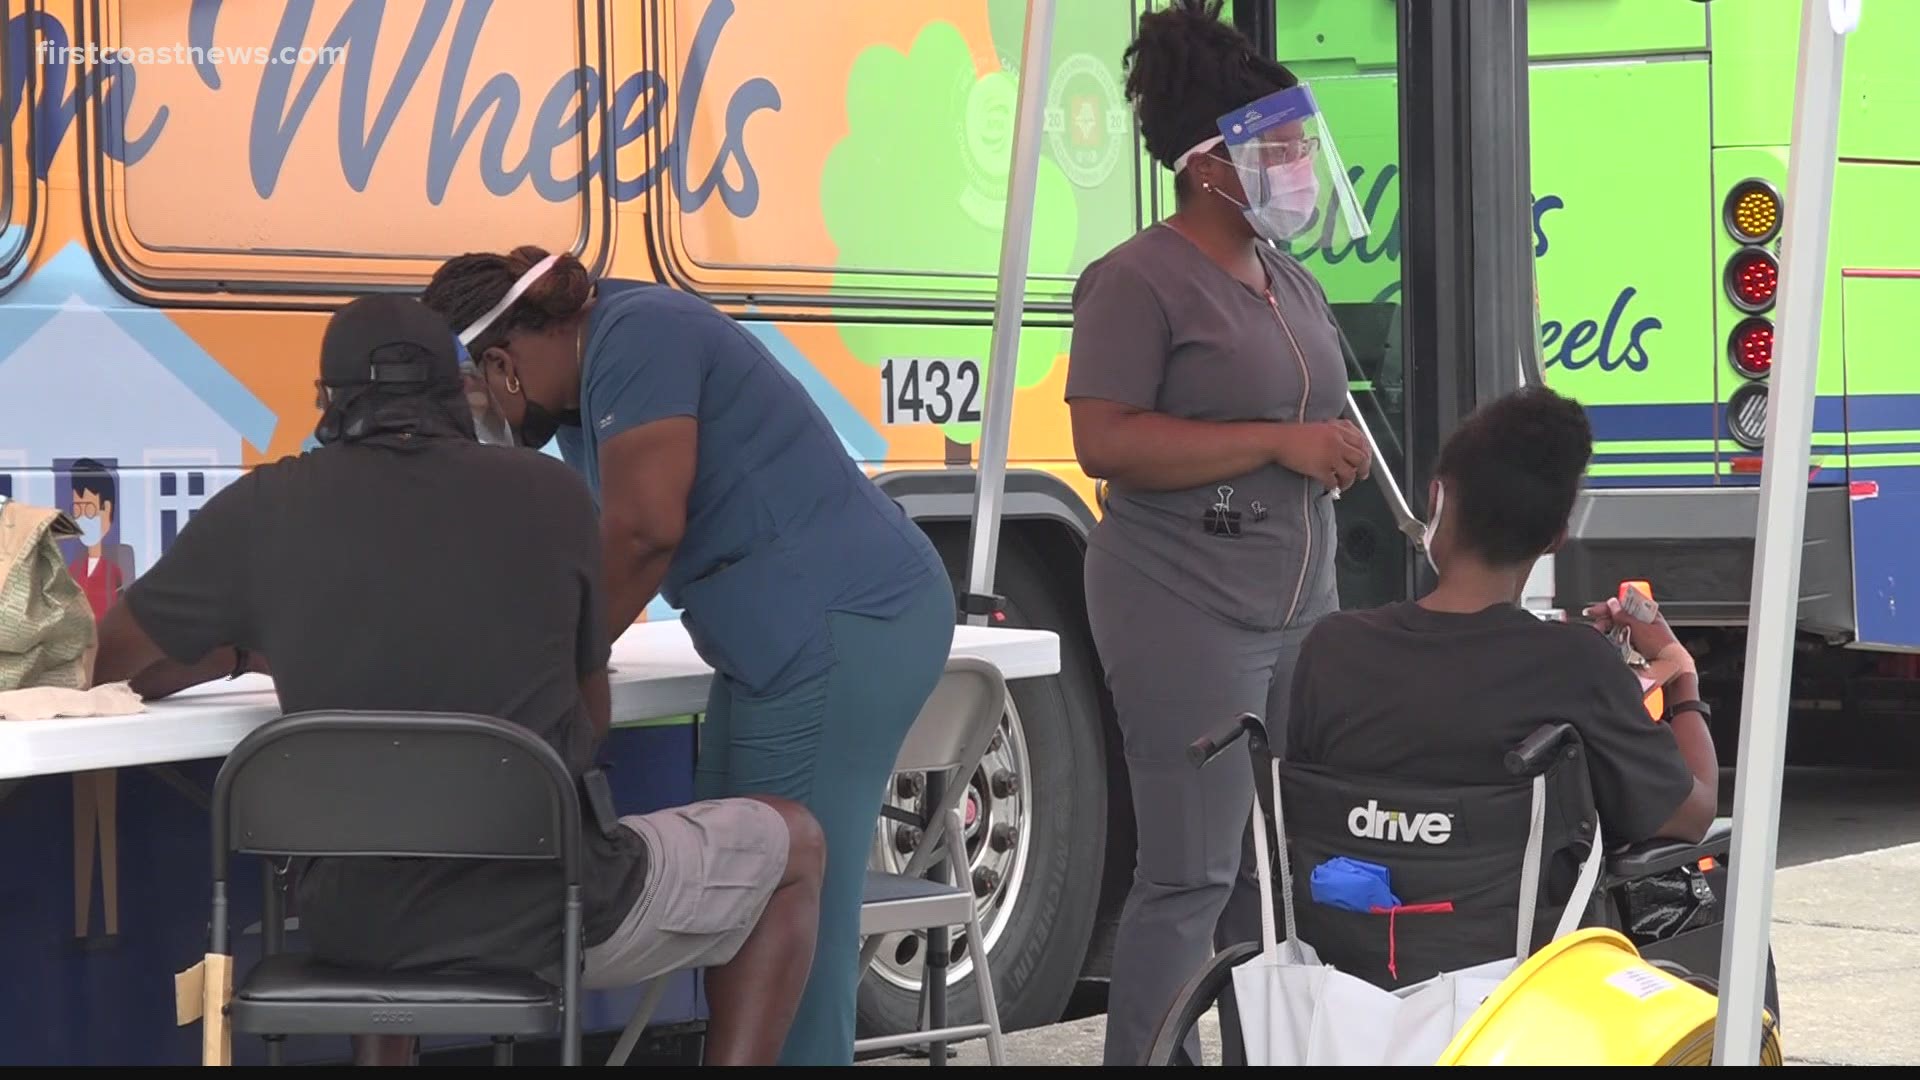 This Jacksonville mobile vaccination bus is seeing fewer and fewer people get the shot.